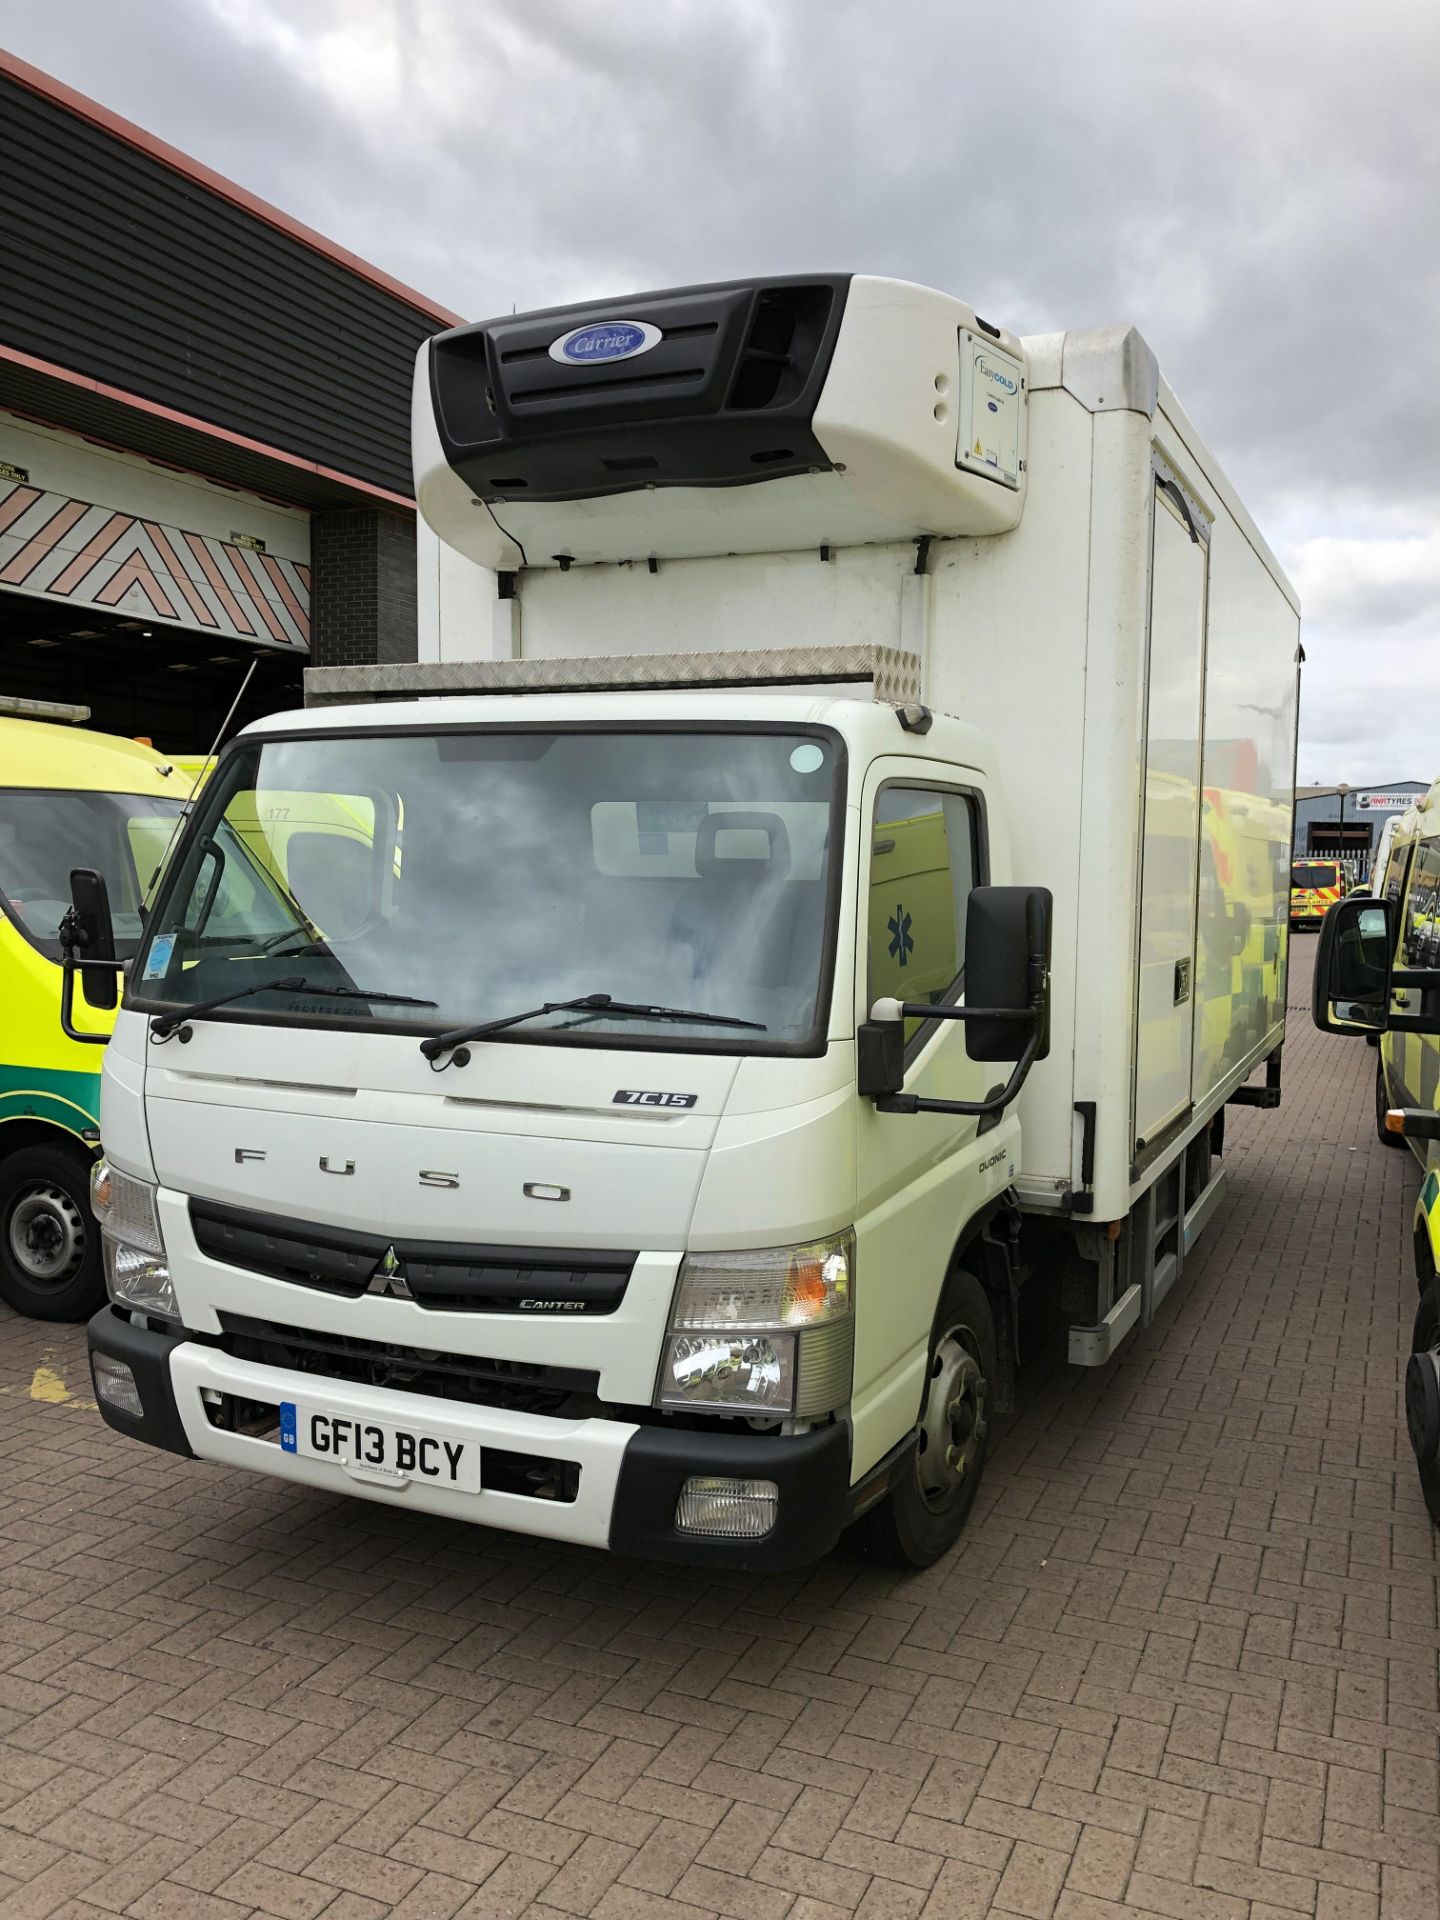 Mitsubishi Fuso Canter Duonic 7C15 registration No GD13 BCY refrigerated 2 axle rigid body diesel - Image 2 of 16